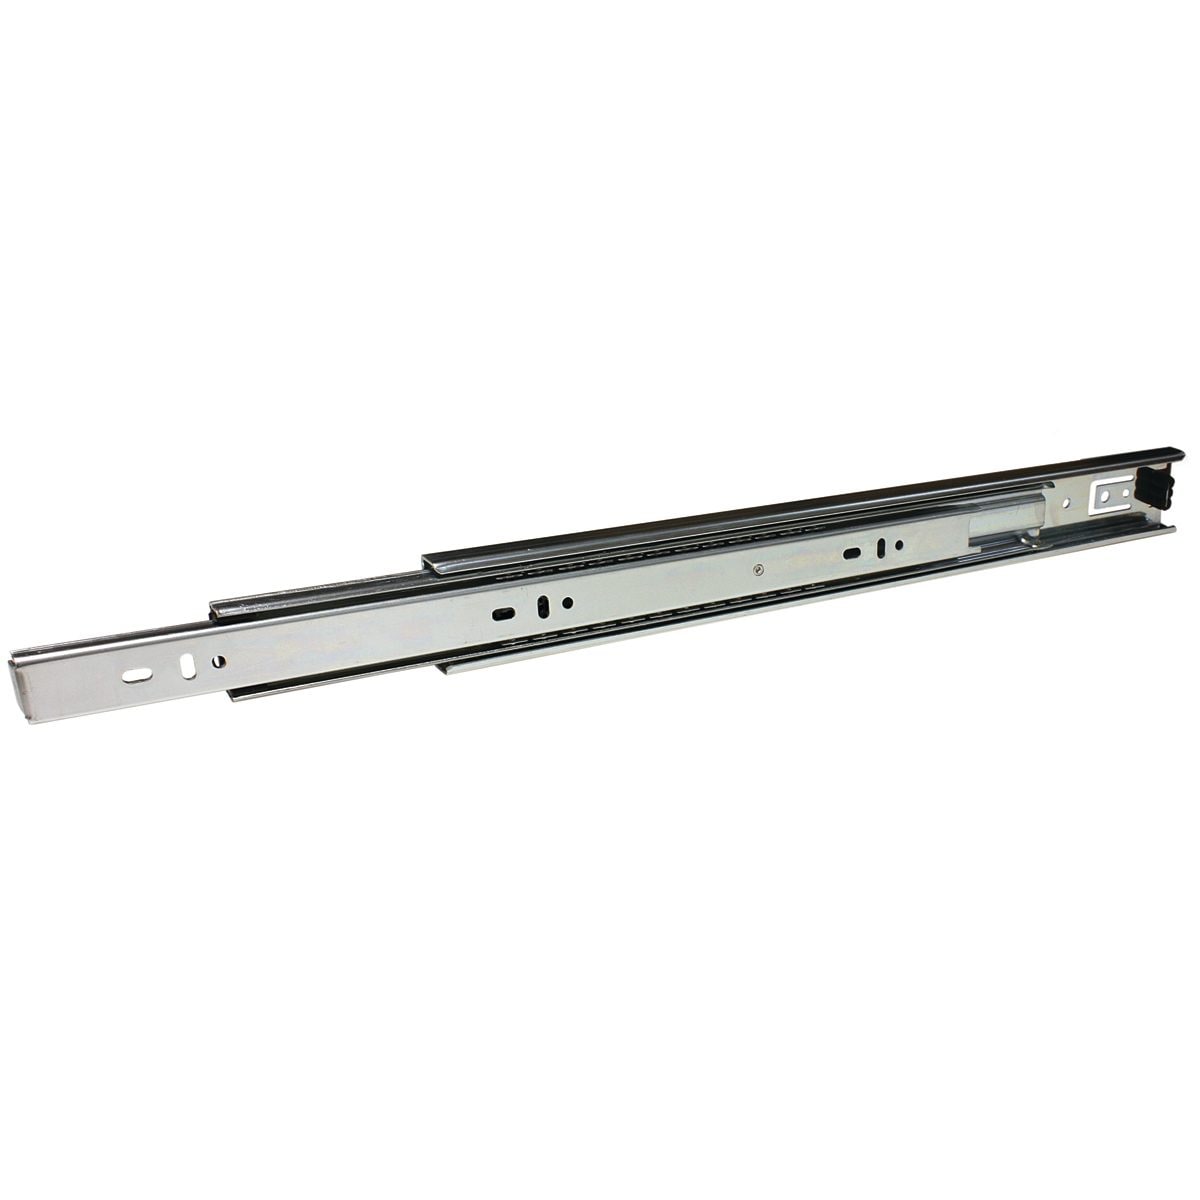 Buy Hettich Collecting Cargo PVC Tray 600 mm Online at Best Price